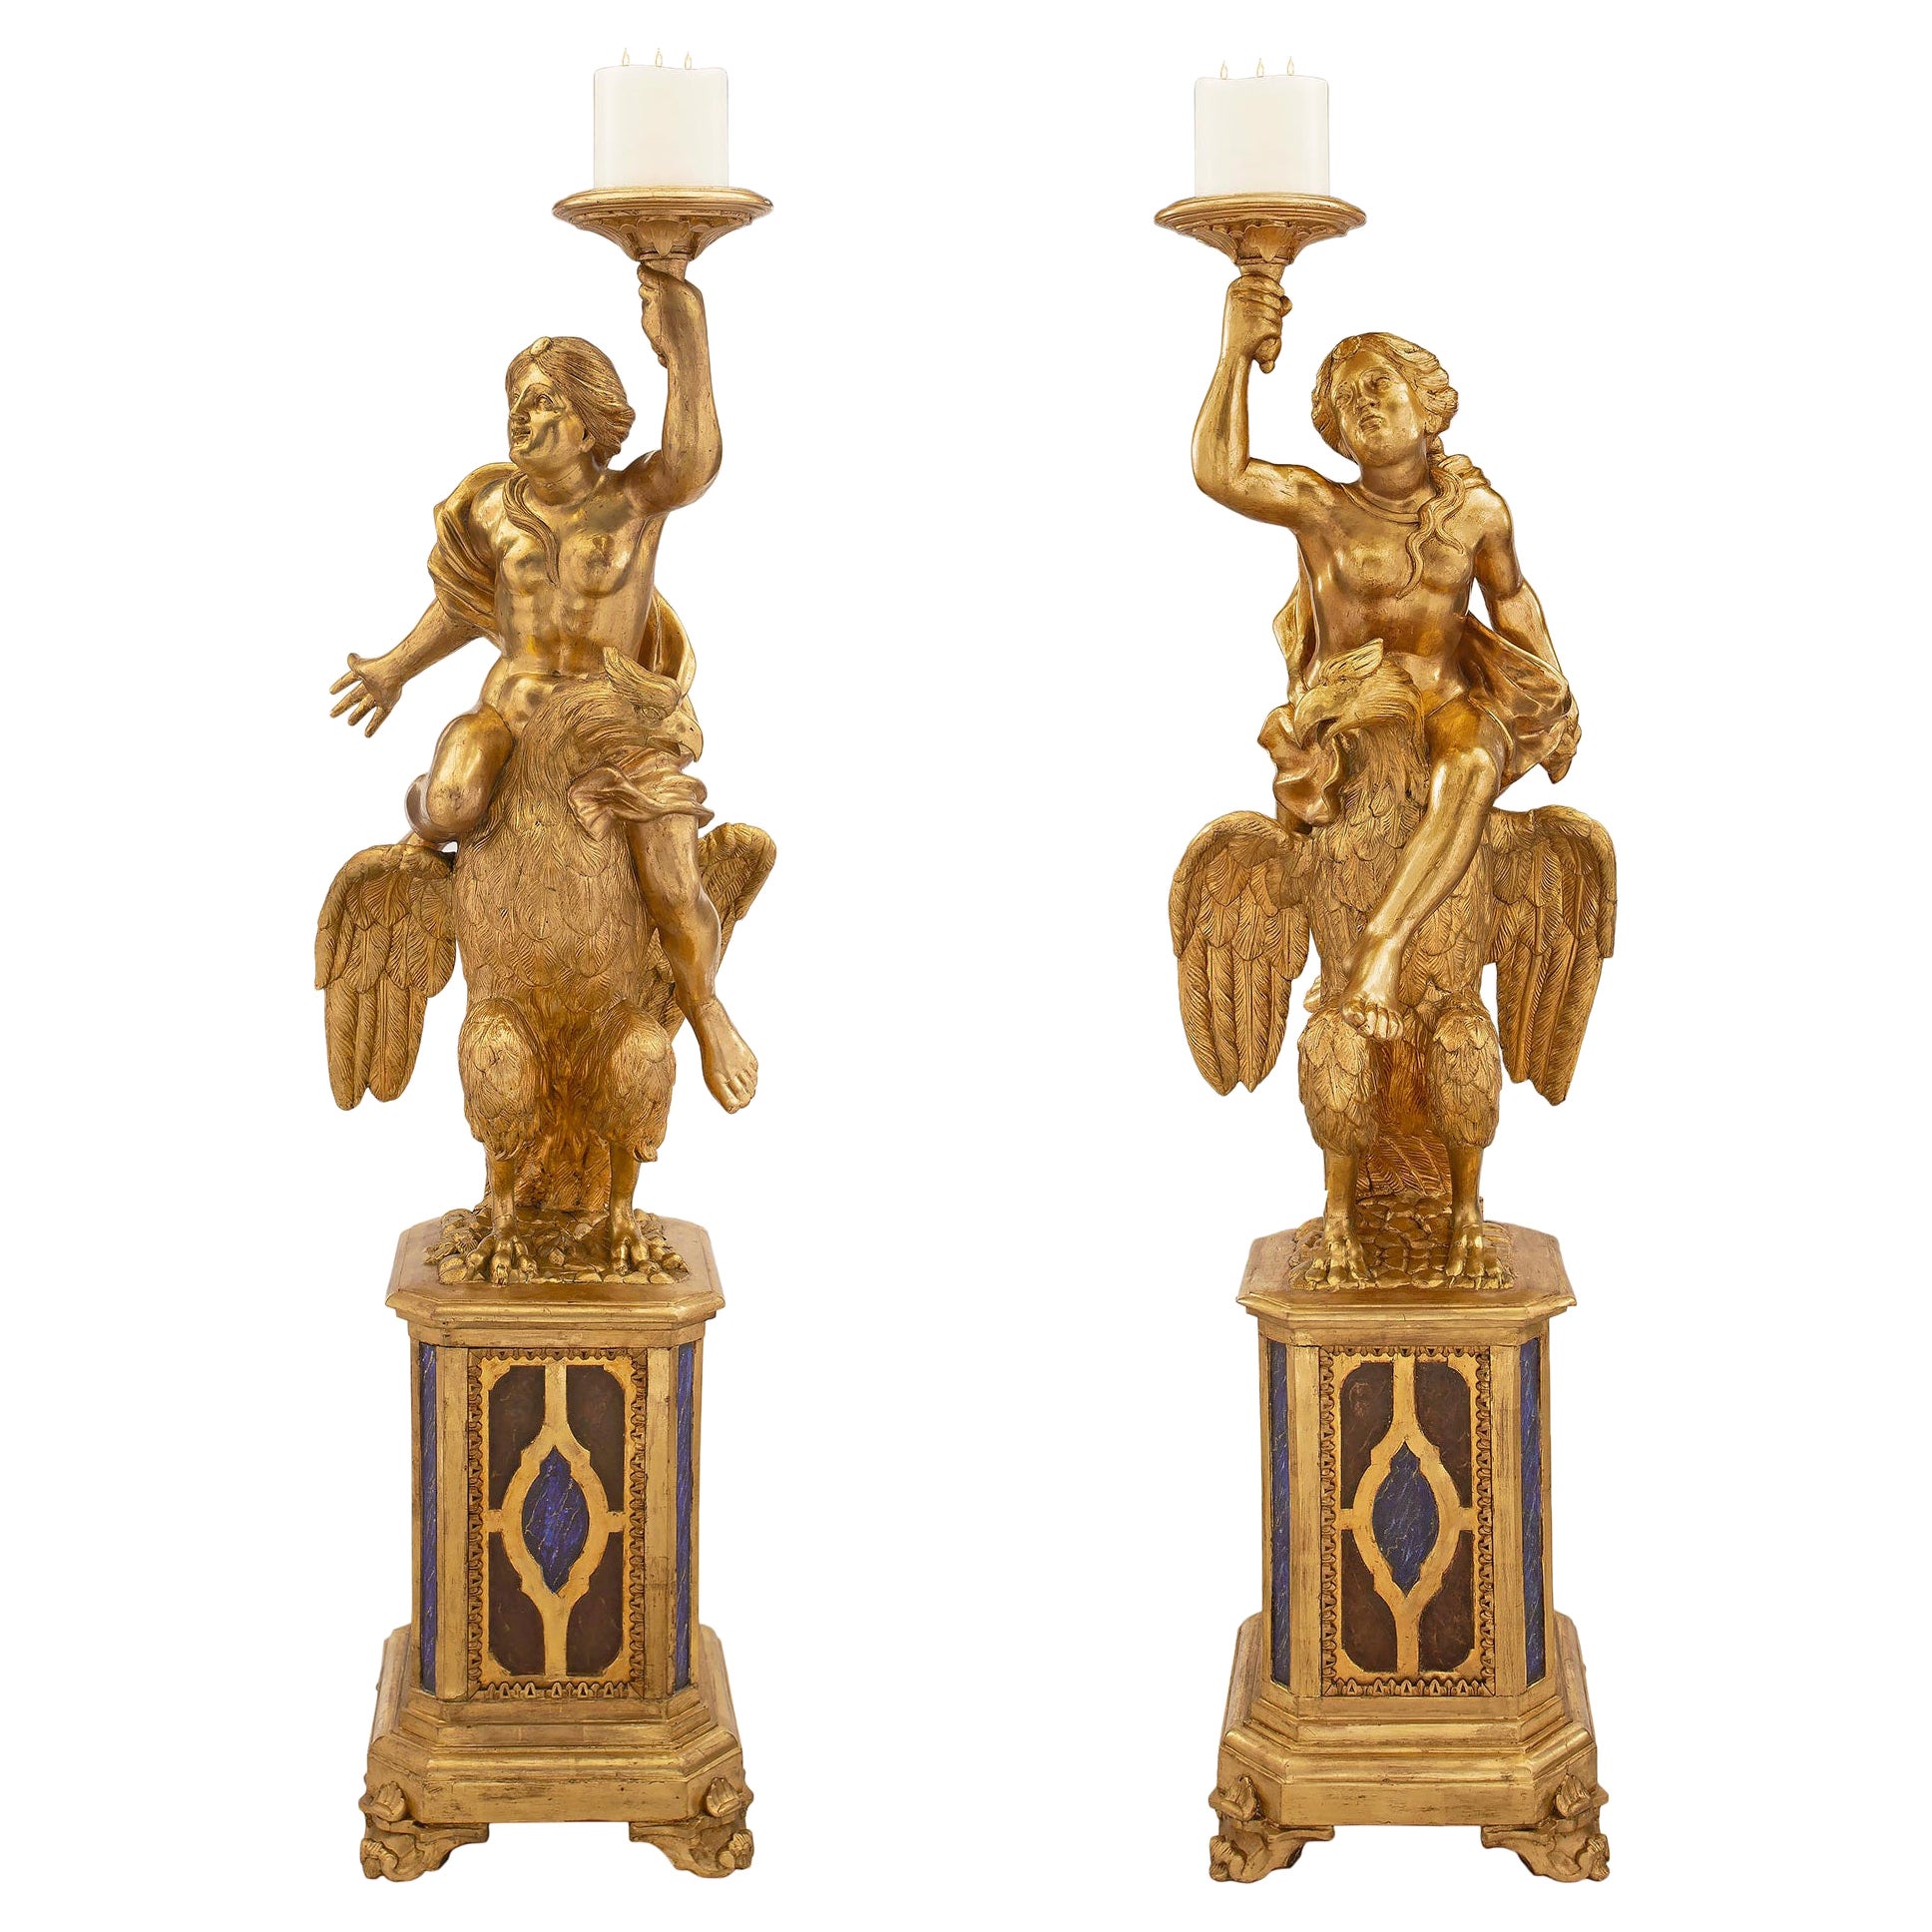 Pair of Italian 18th Century Giltwood and Faux Painted Baroque Torchières For Sale